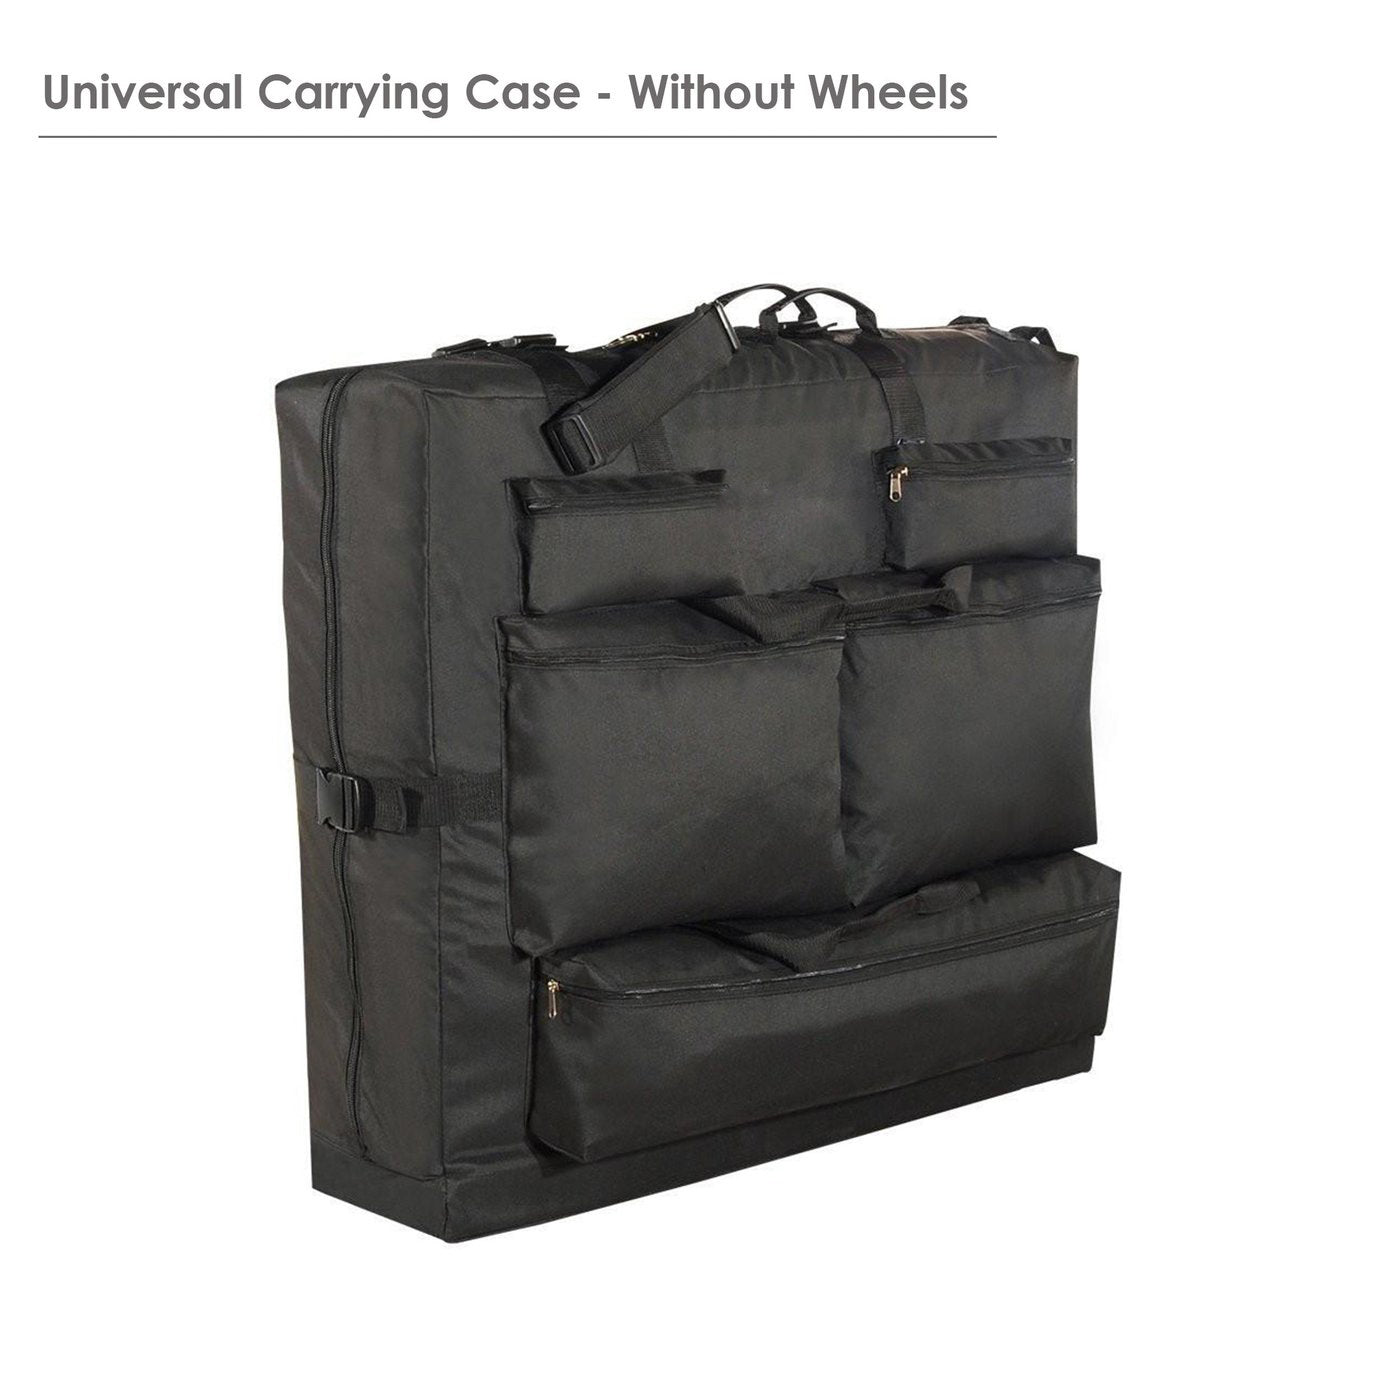 Universal Massage Table Carrying Case with Wheels(Fits tables 25"-31")